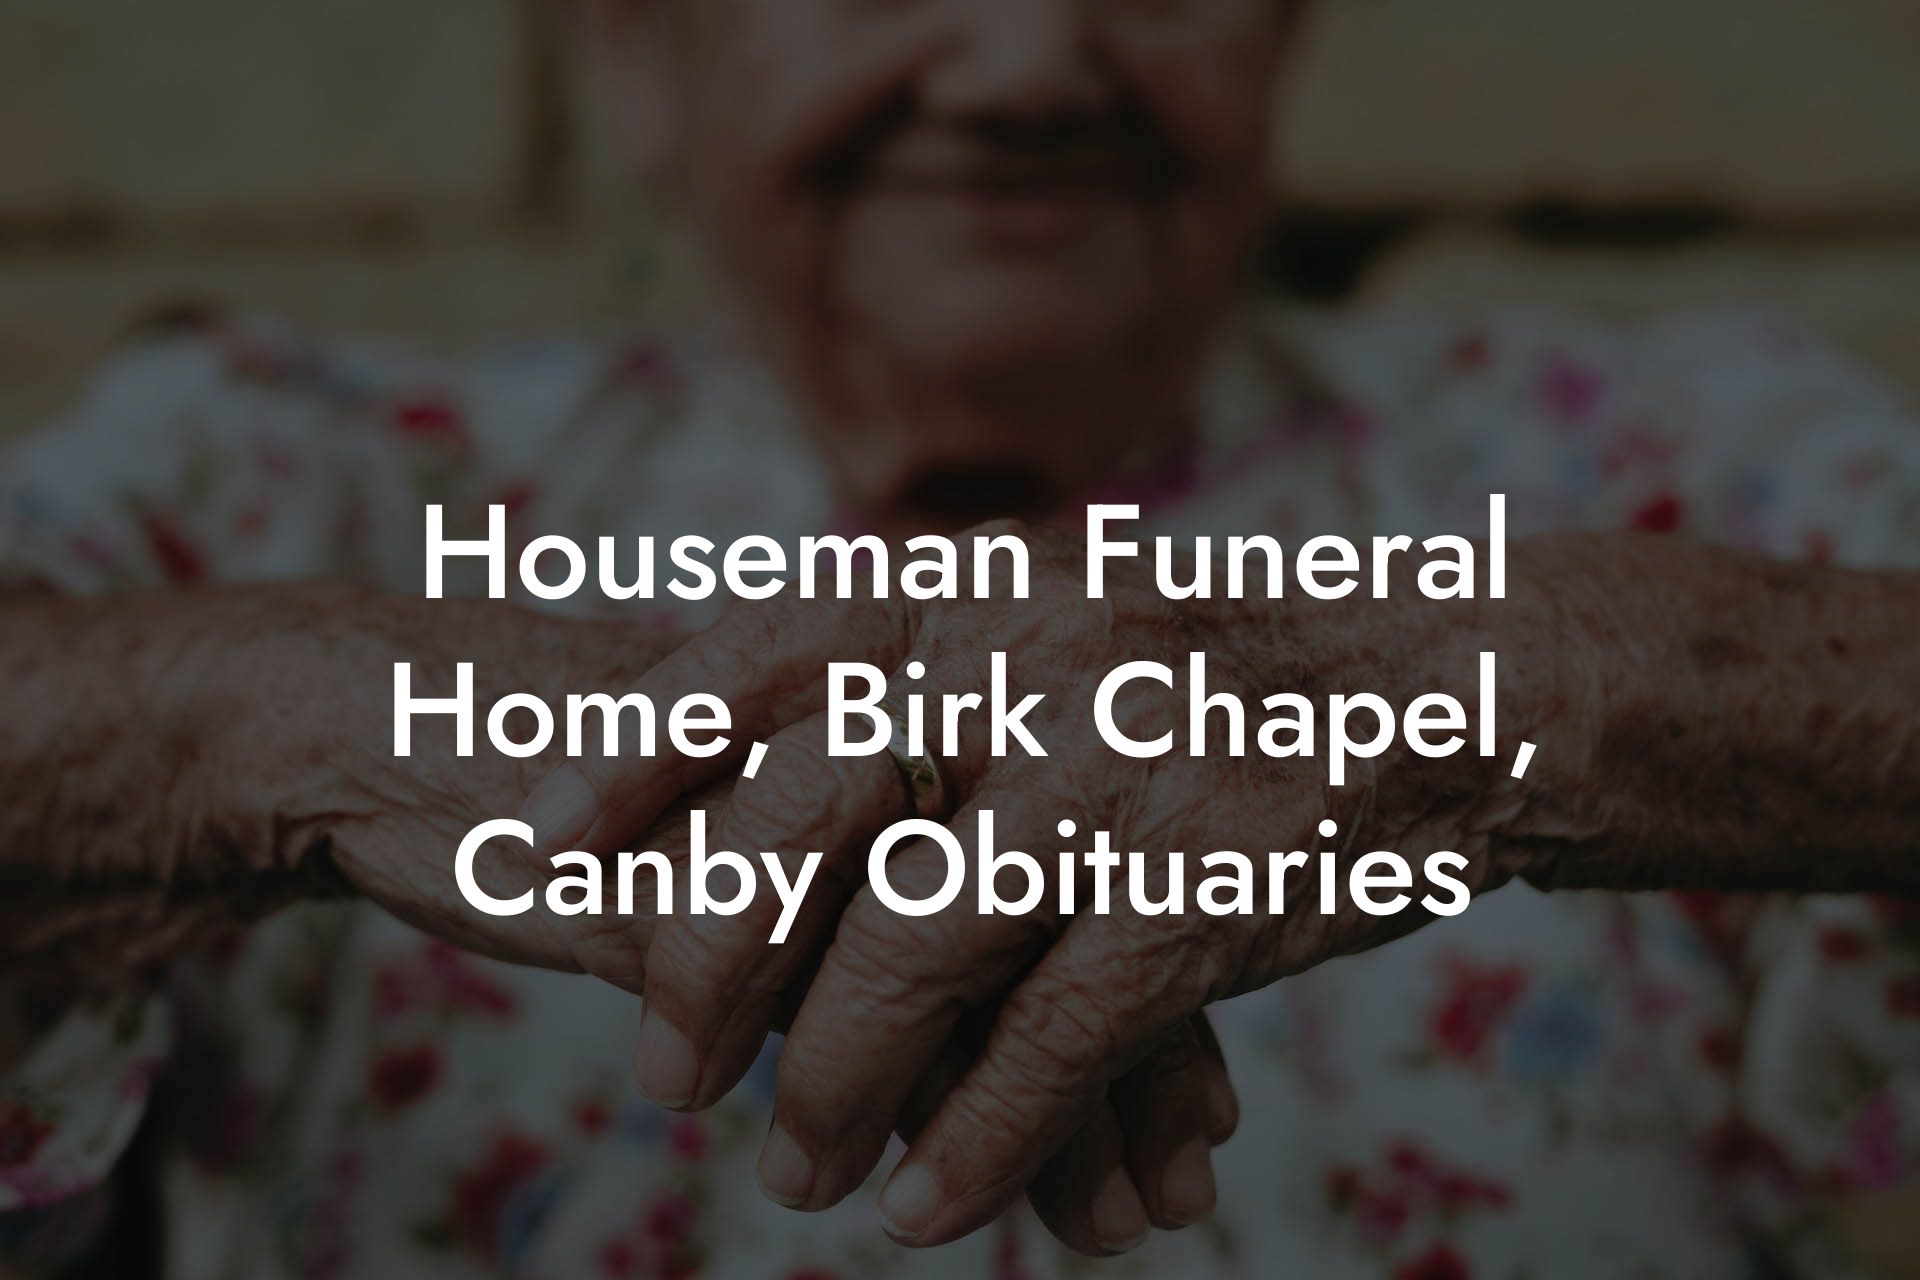 Houseman Funeral Home, Birk Chapel, Canby Obituaries